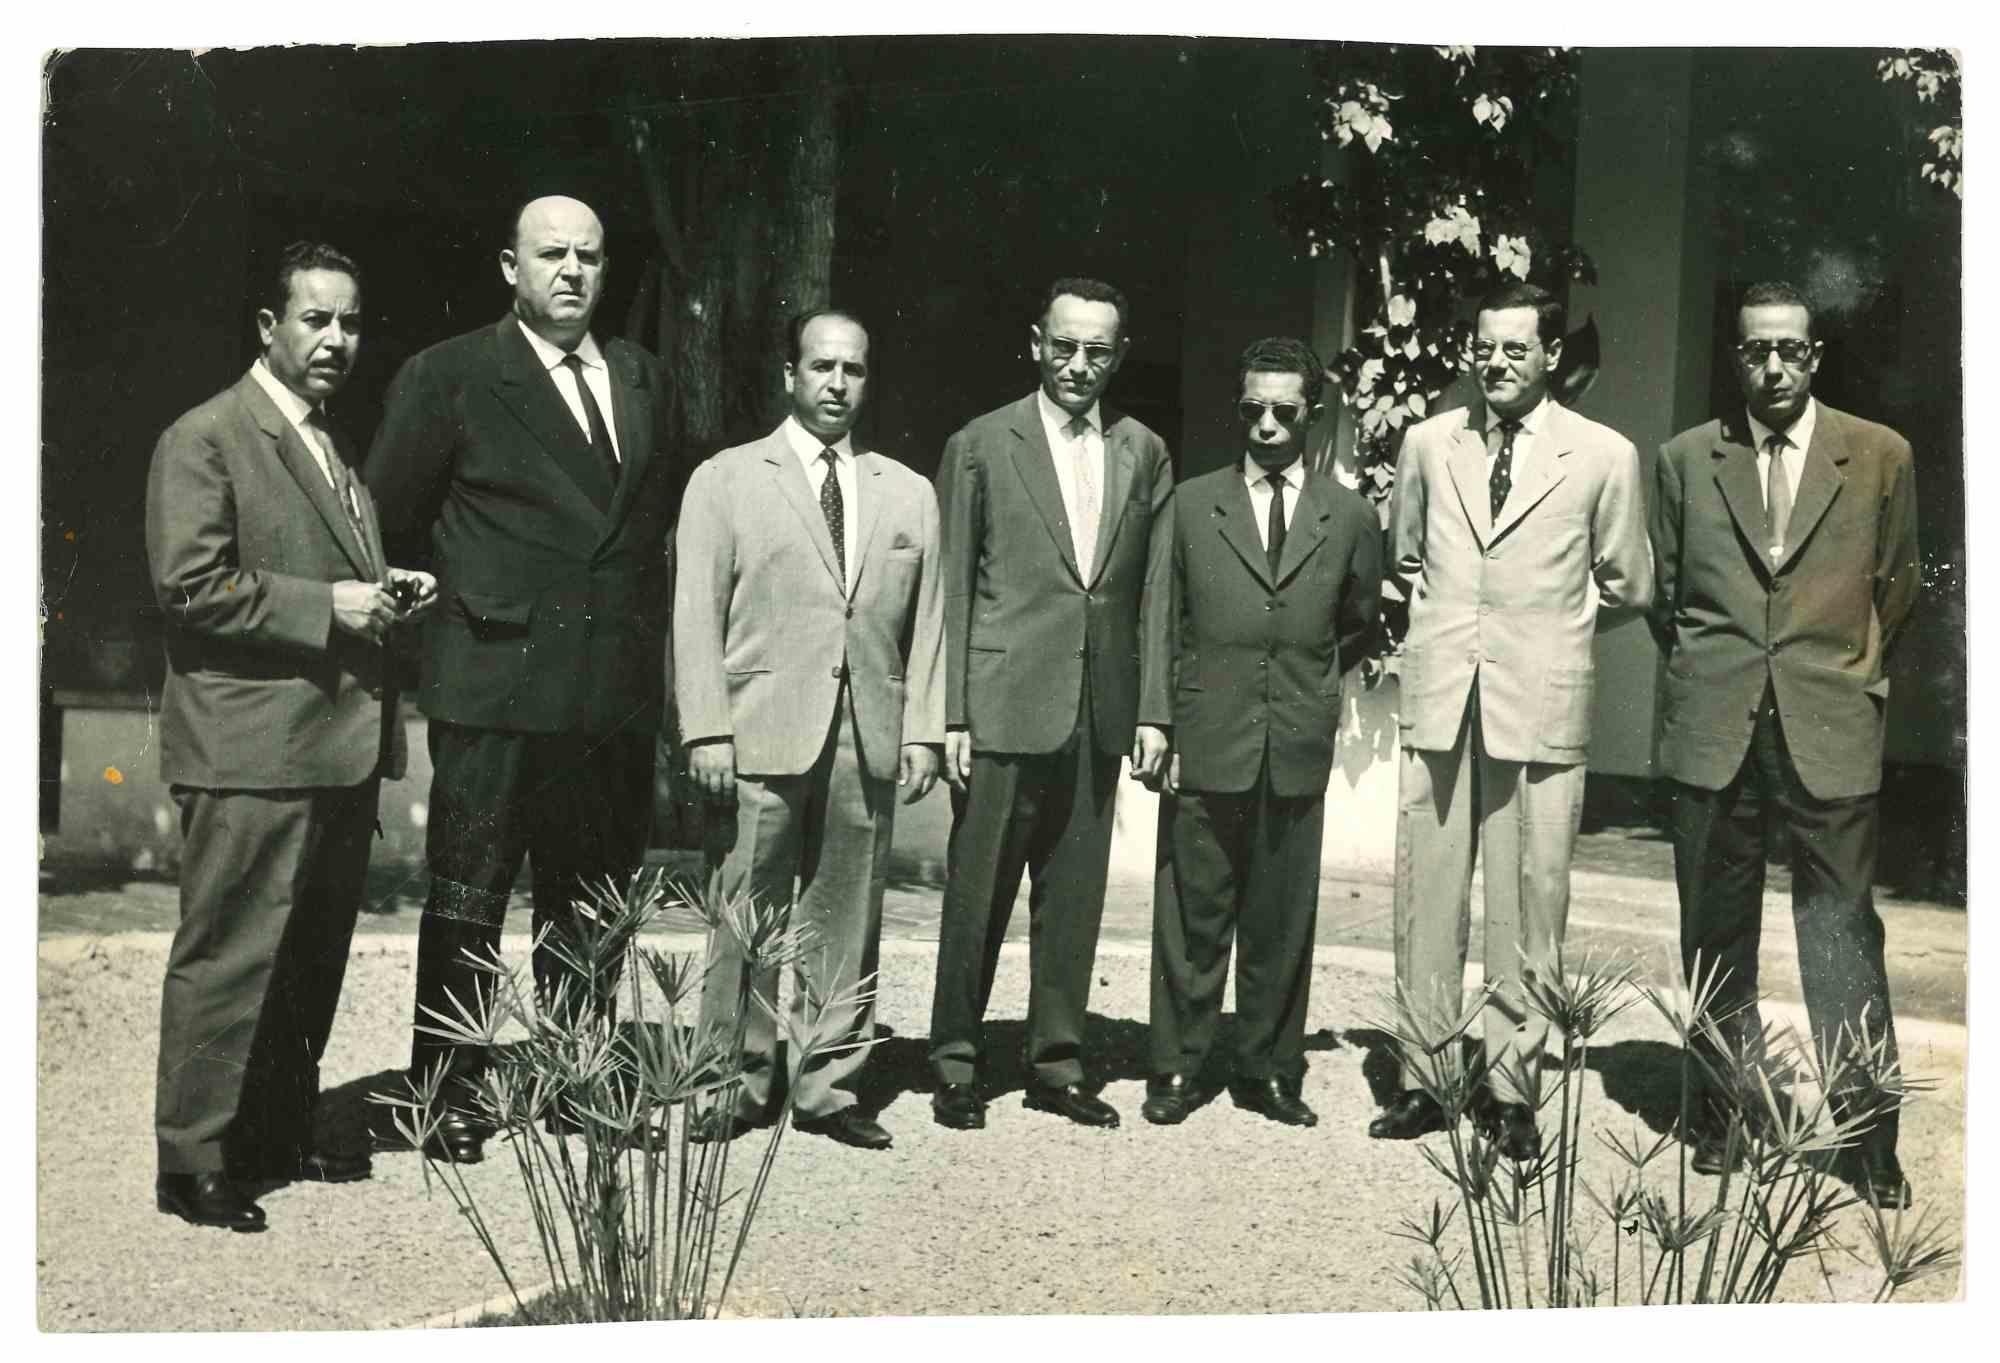 Unknown Figurative Photograph - Ministers of Algerian Government - Historical Photo  - 1960s